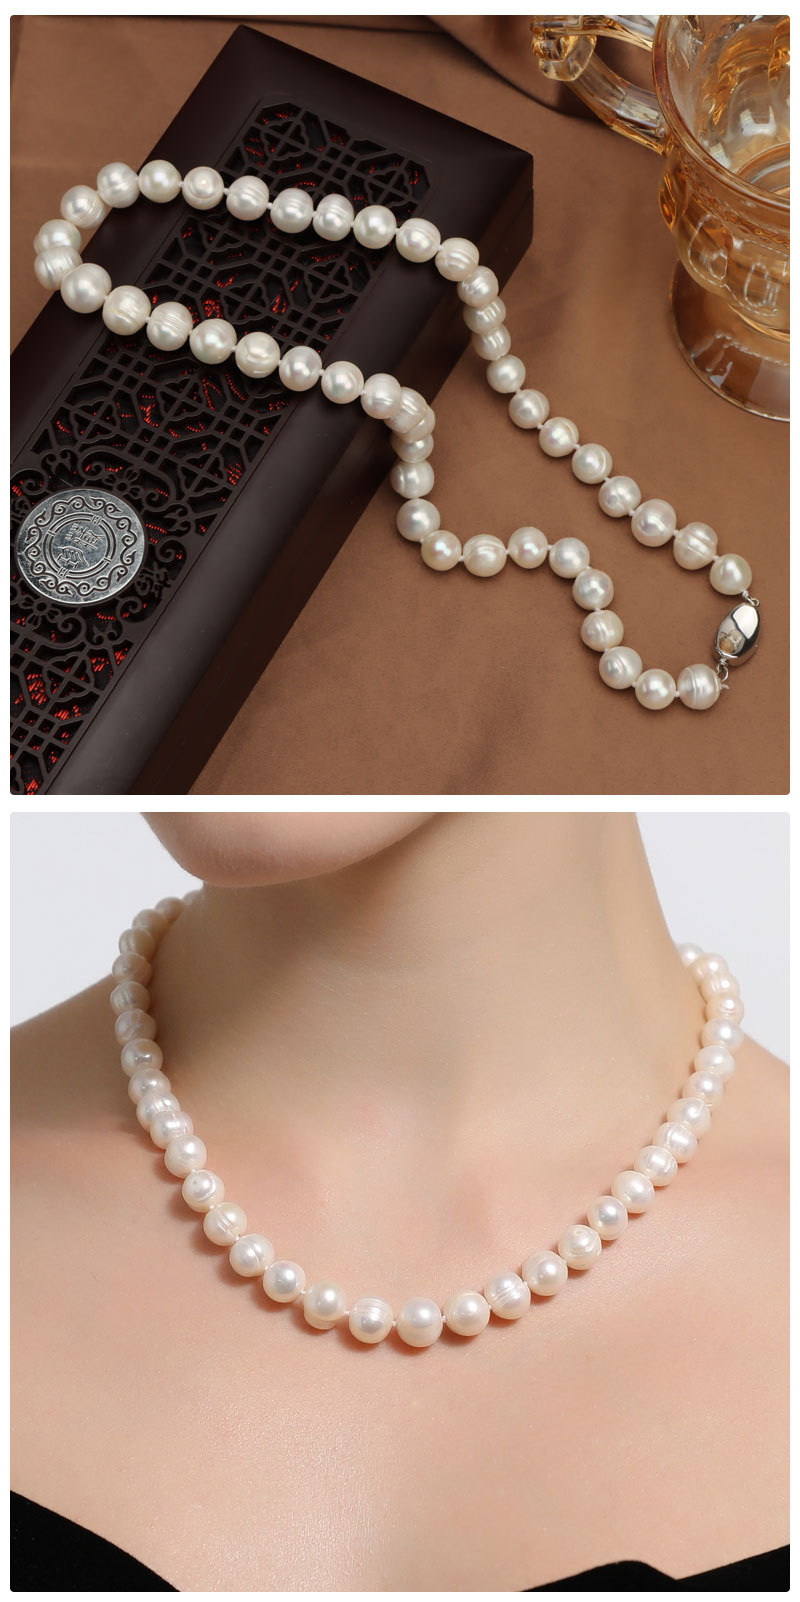 7-8mm natural freshwater pearl threaded bead necklace freshwater pearl necklace choker for women girl baroque pearl necklace pearl strand jewelry handmade pearl jewelry pearl strand wedding christmas valentine gift wedding pearl jewelry elegant fashionable